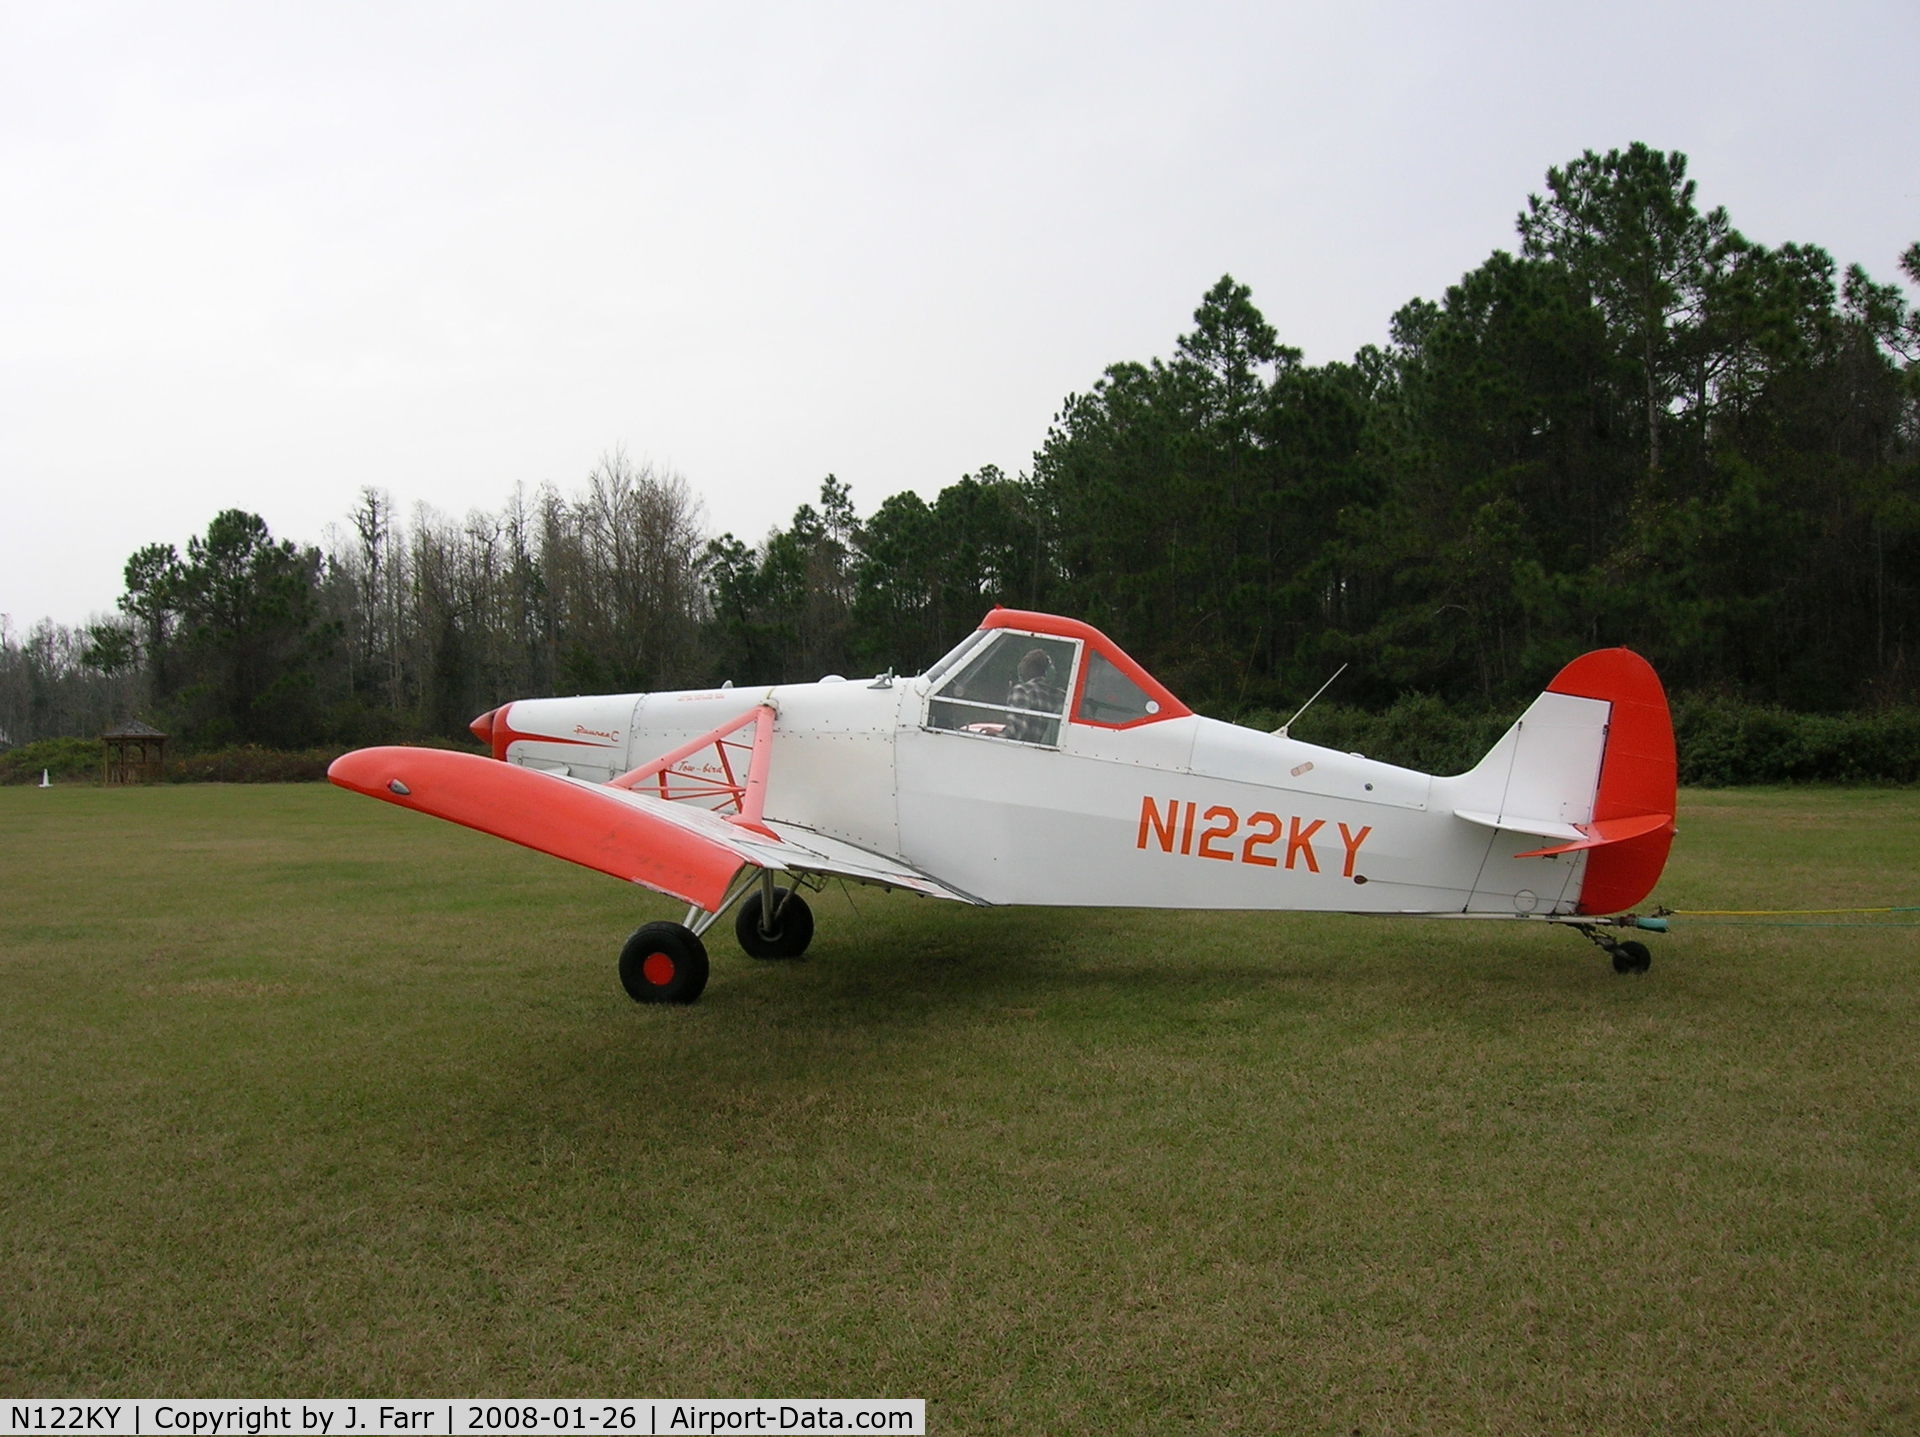 N122KY, 1968 Piper PA-25-260 C/N 25-4576, Glider Tow Plane